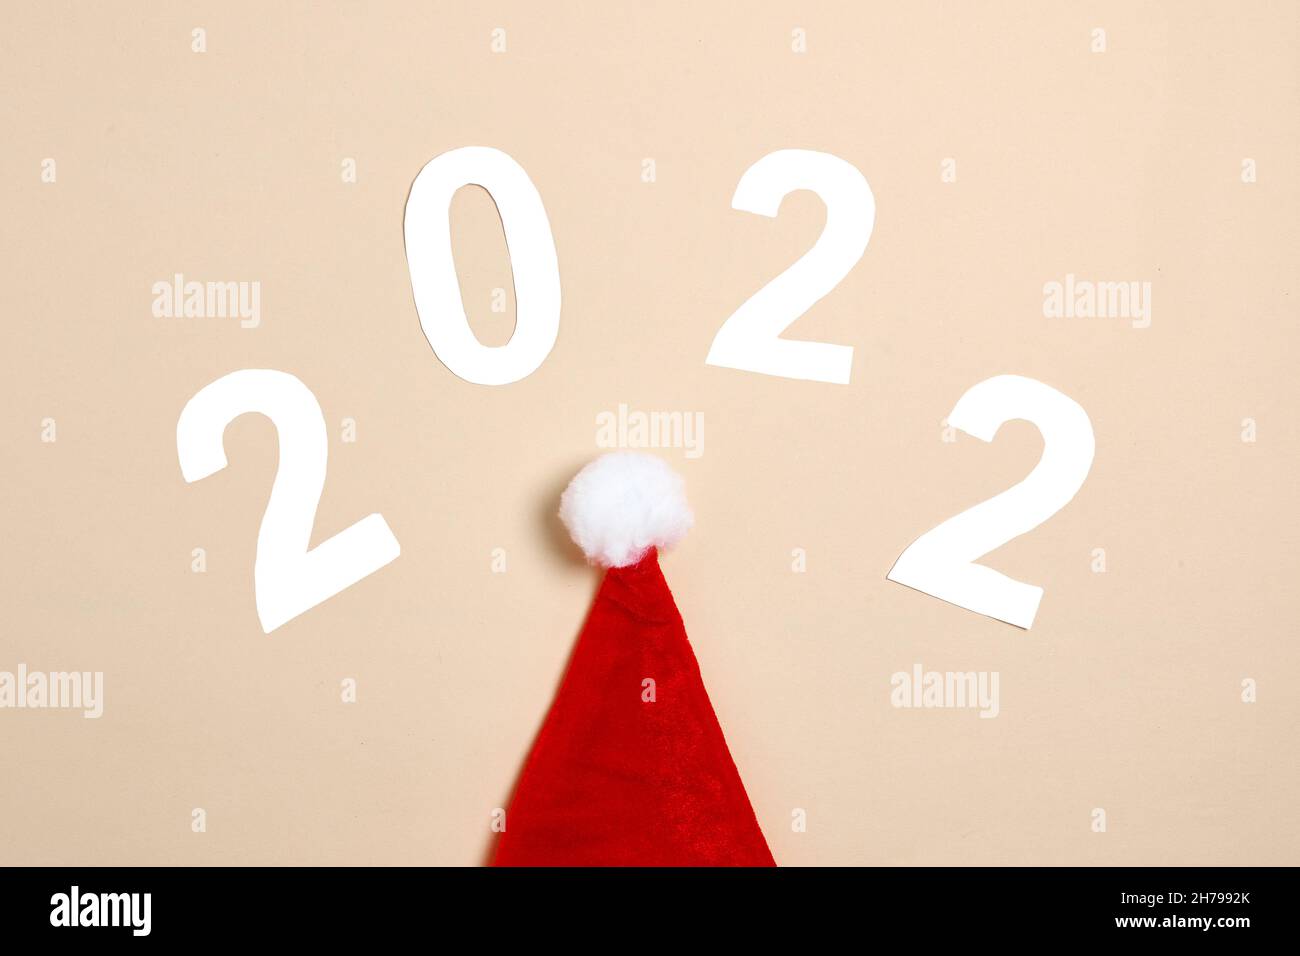 santa hat and 2022 number made from paper. merry christmas and Happy New Year concept on beige background. 2022 creative background, card design Stock Photo